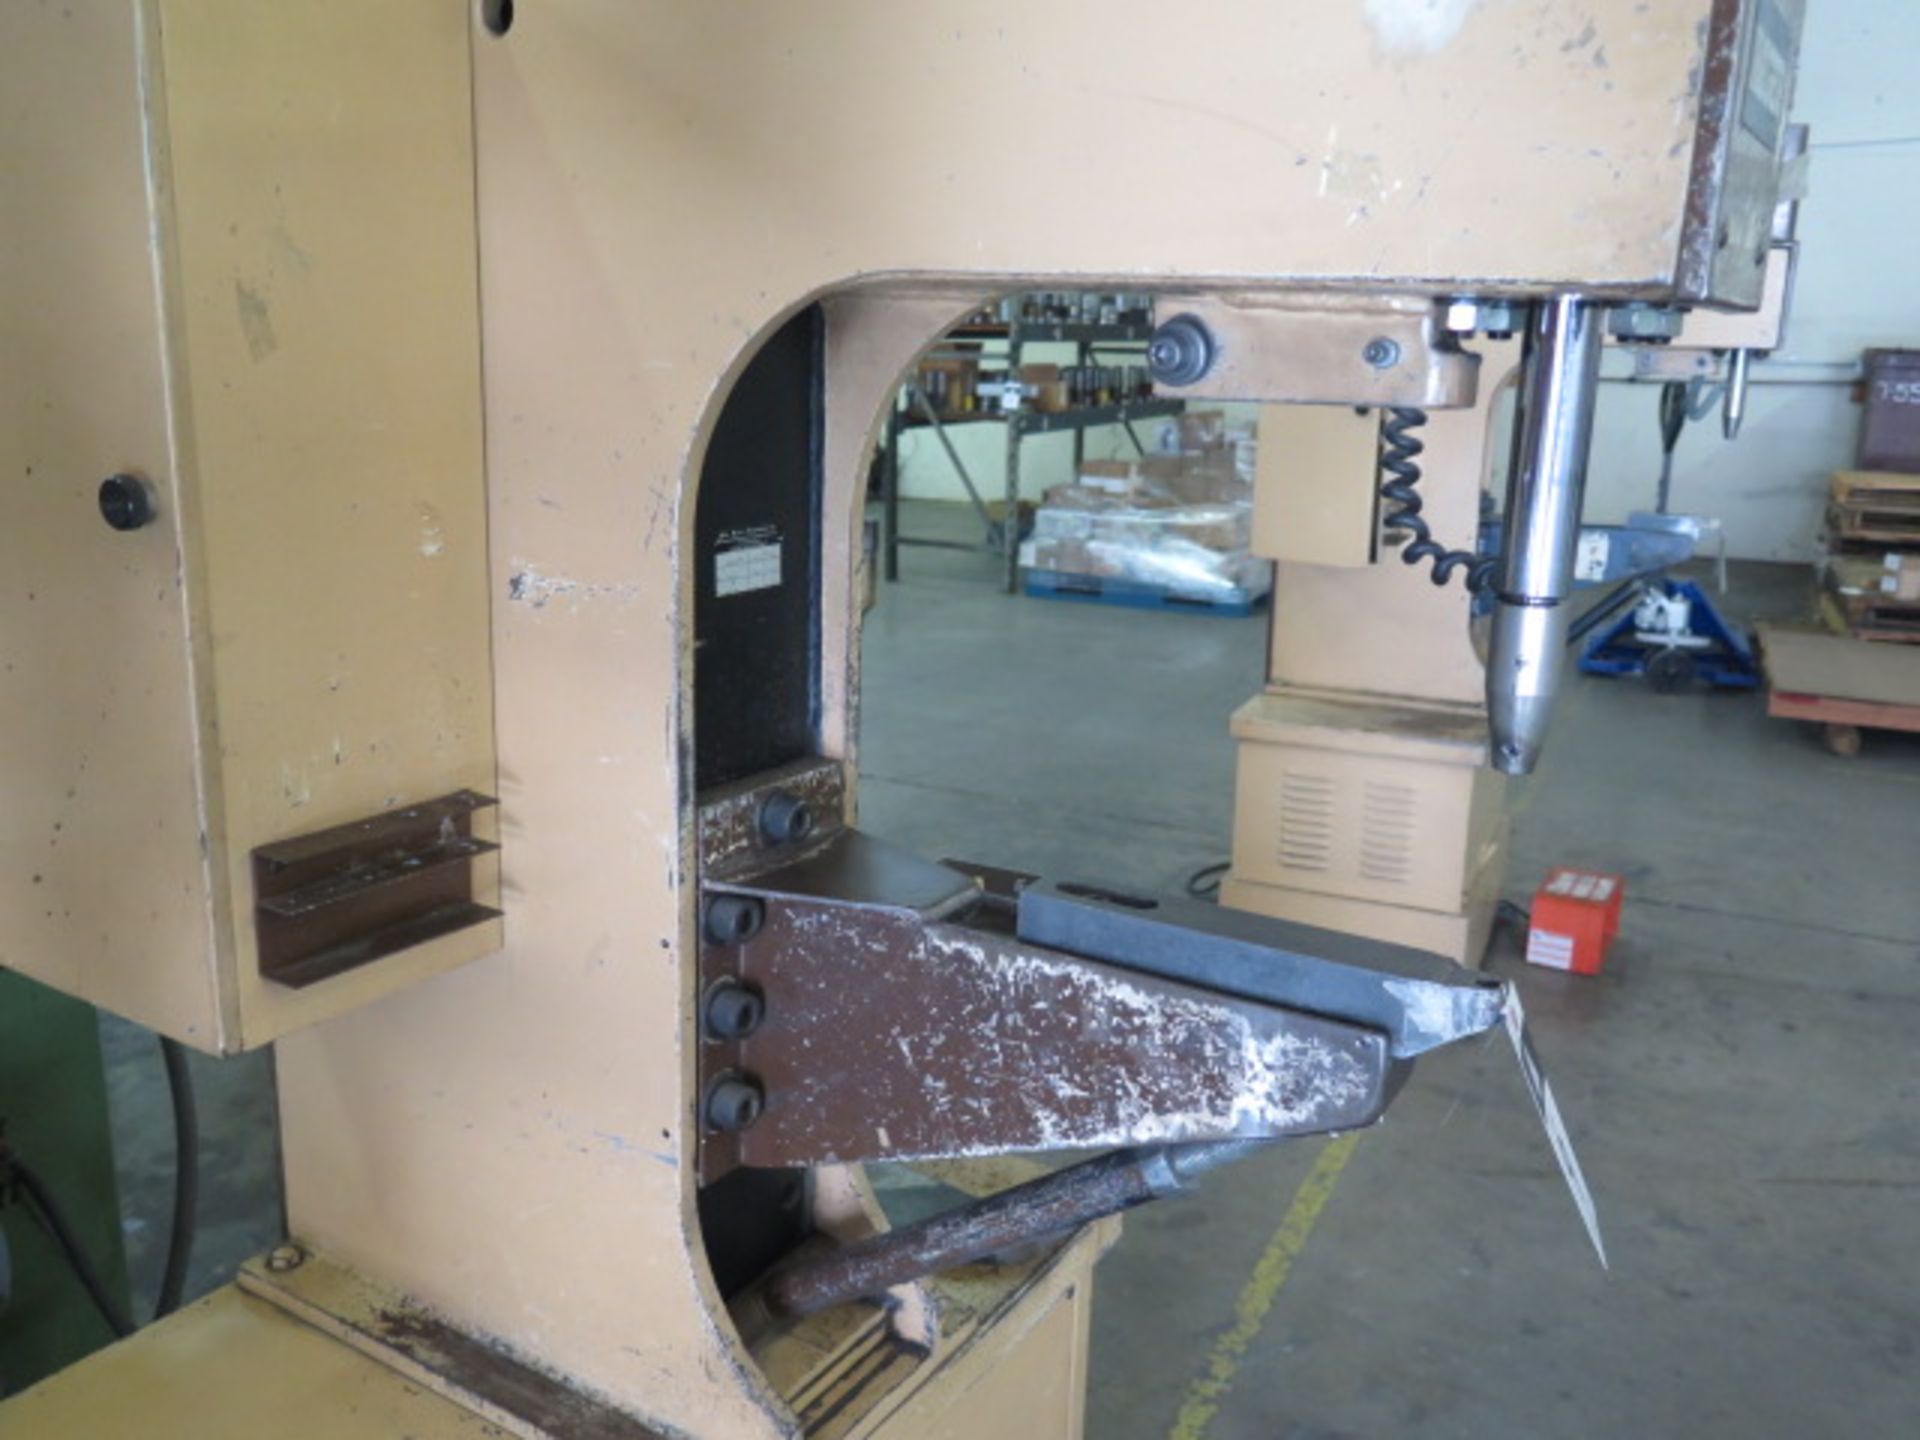 Haeger HP6-B 6 Ton x 18" Hardware Insertion Press s/n 211 (SOLD AS-IS - NO WARRANTY) - Image 3 of 8